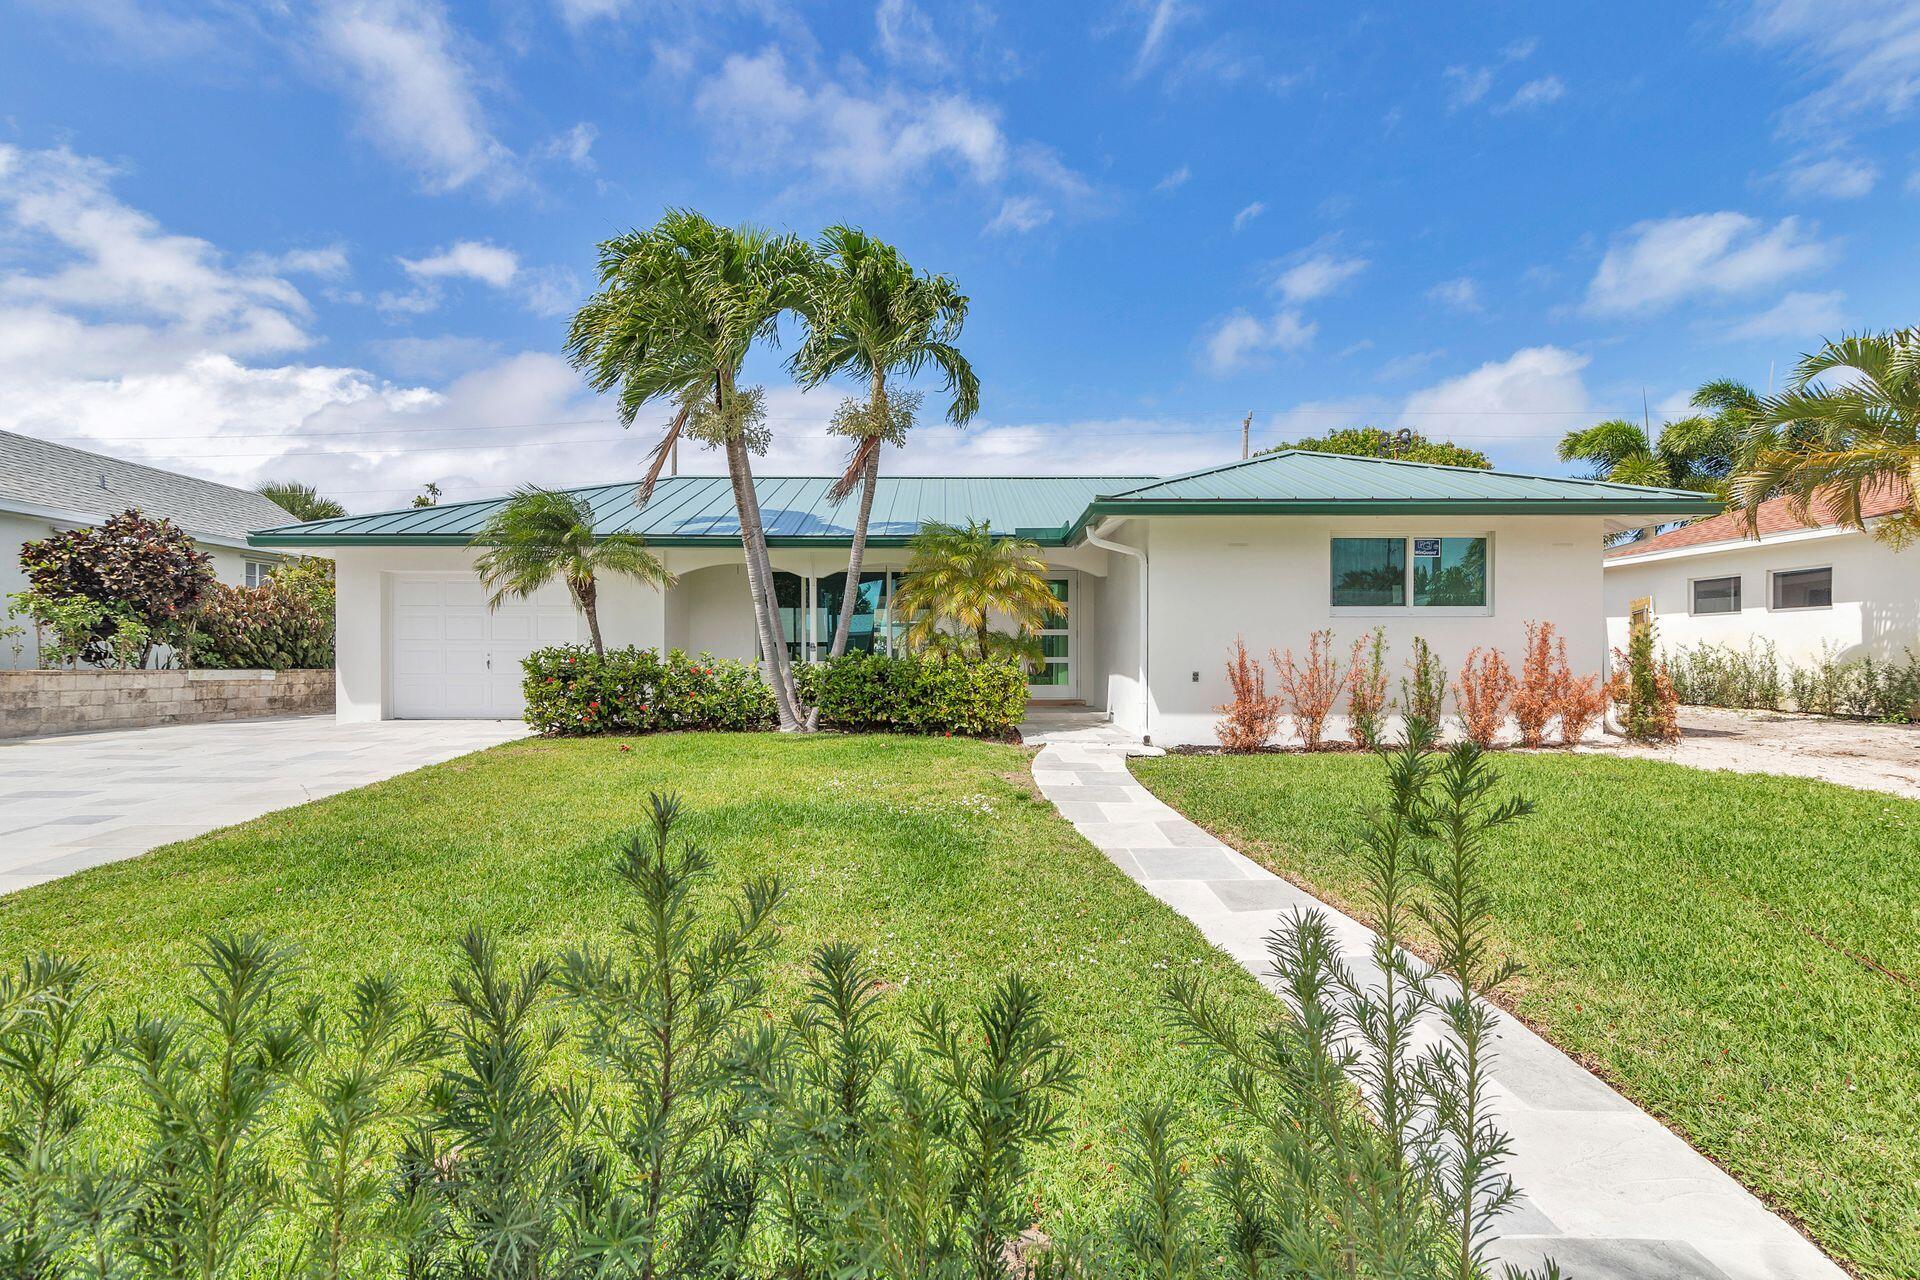 369 Franklin Road, West Palm Beach, Palm Beach County, Florida - 3 Bedrooms  
3 Bathrooms - 